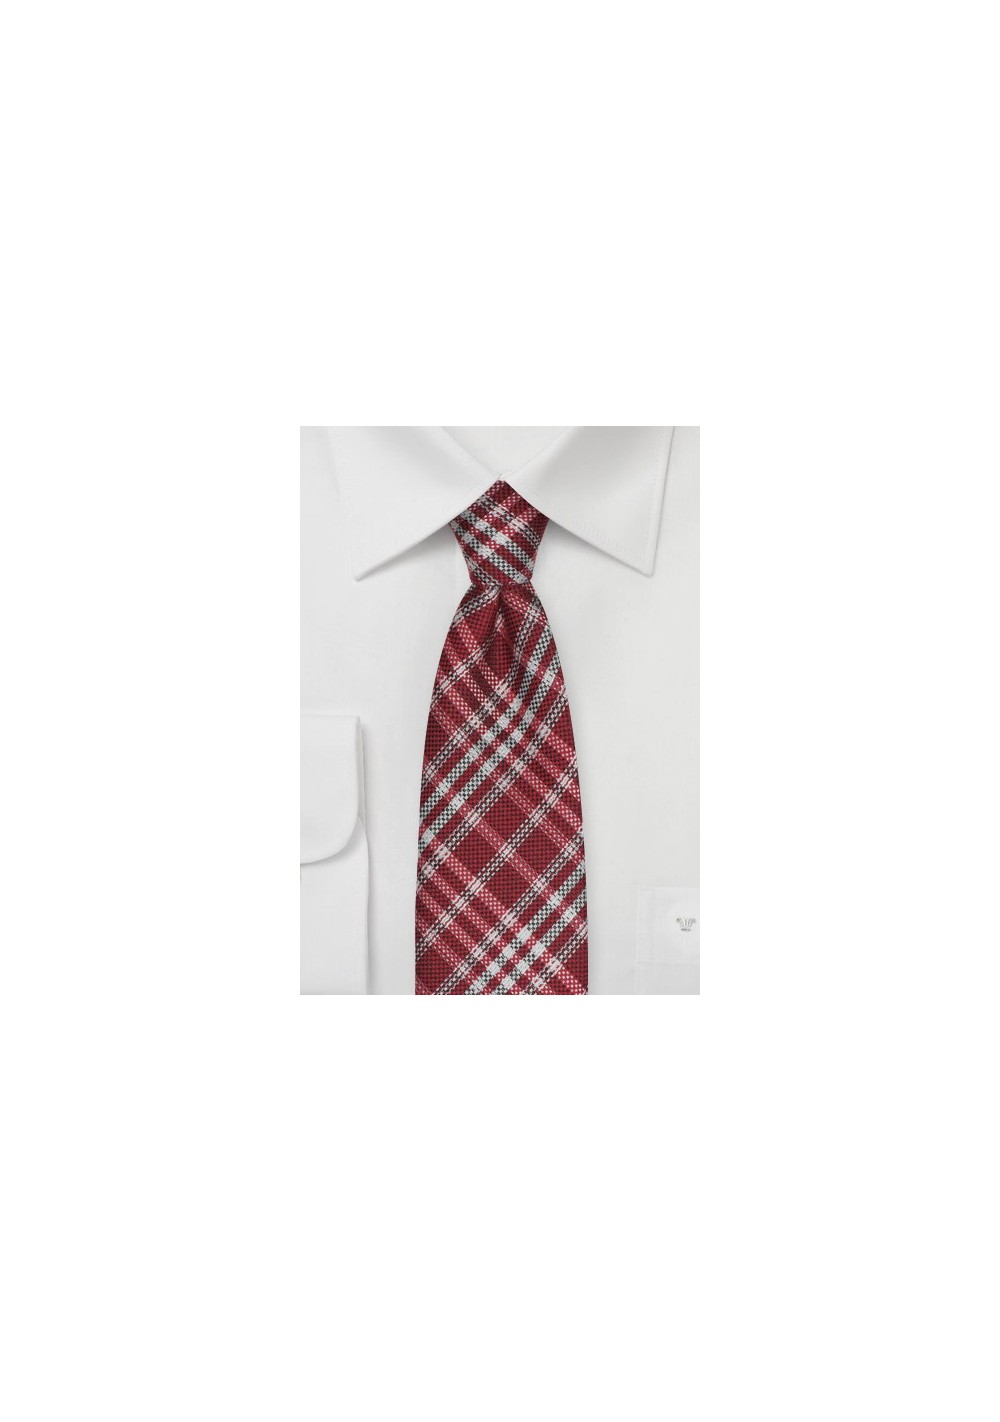 Plaid Tie in Crimson Red and Silver